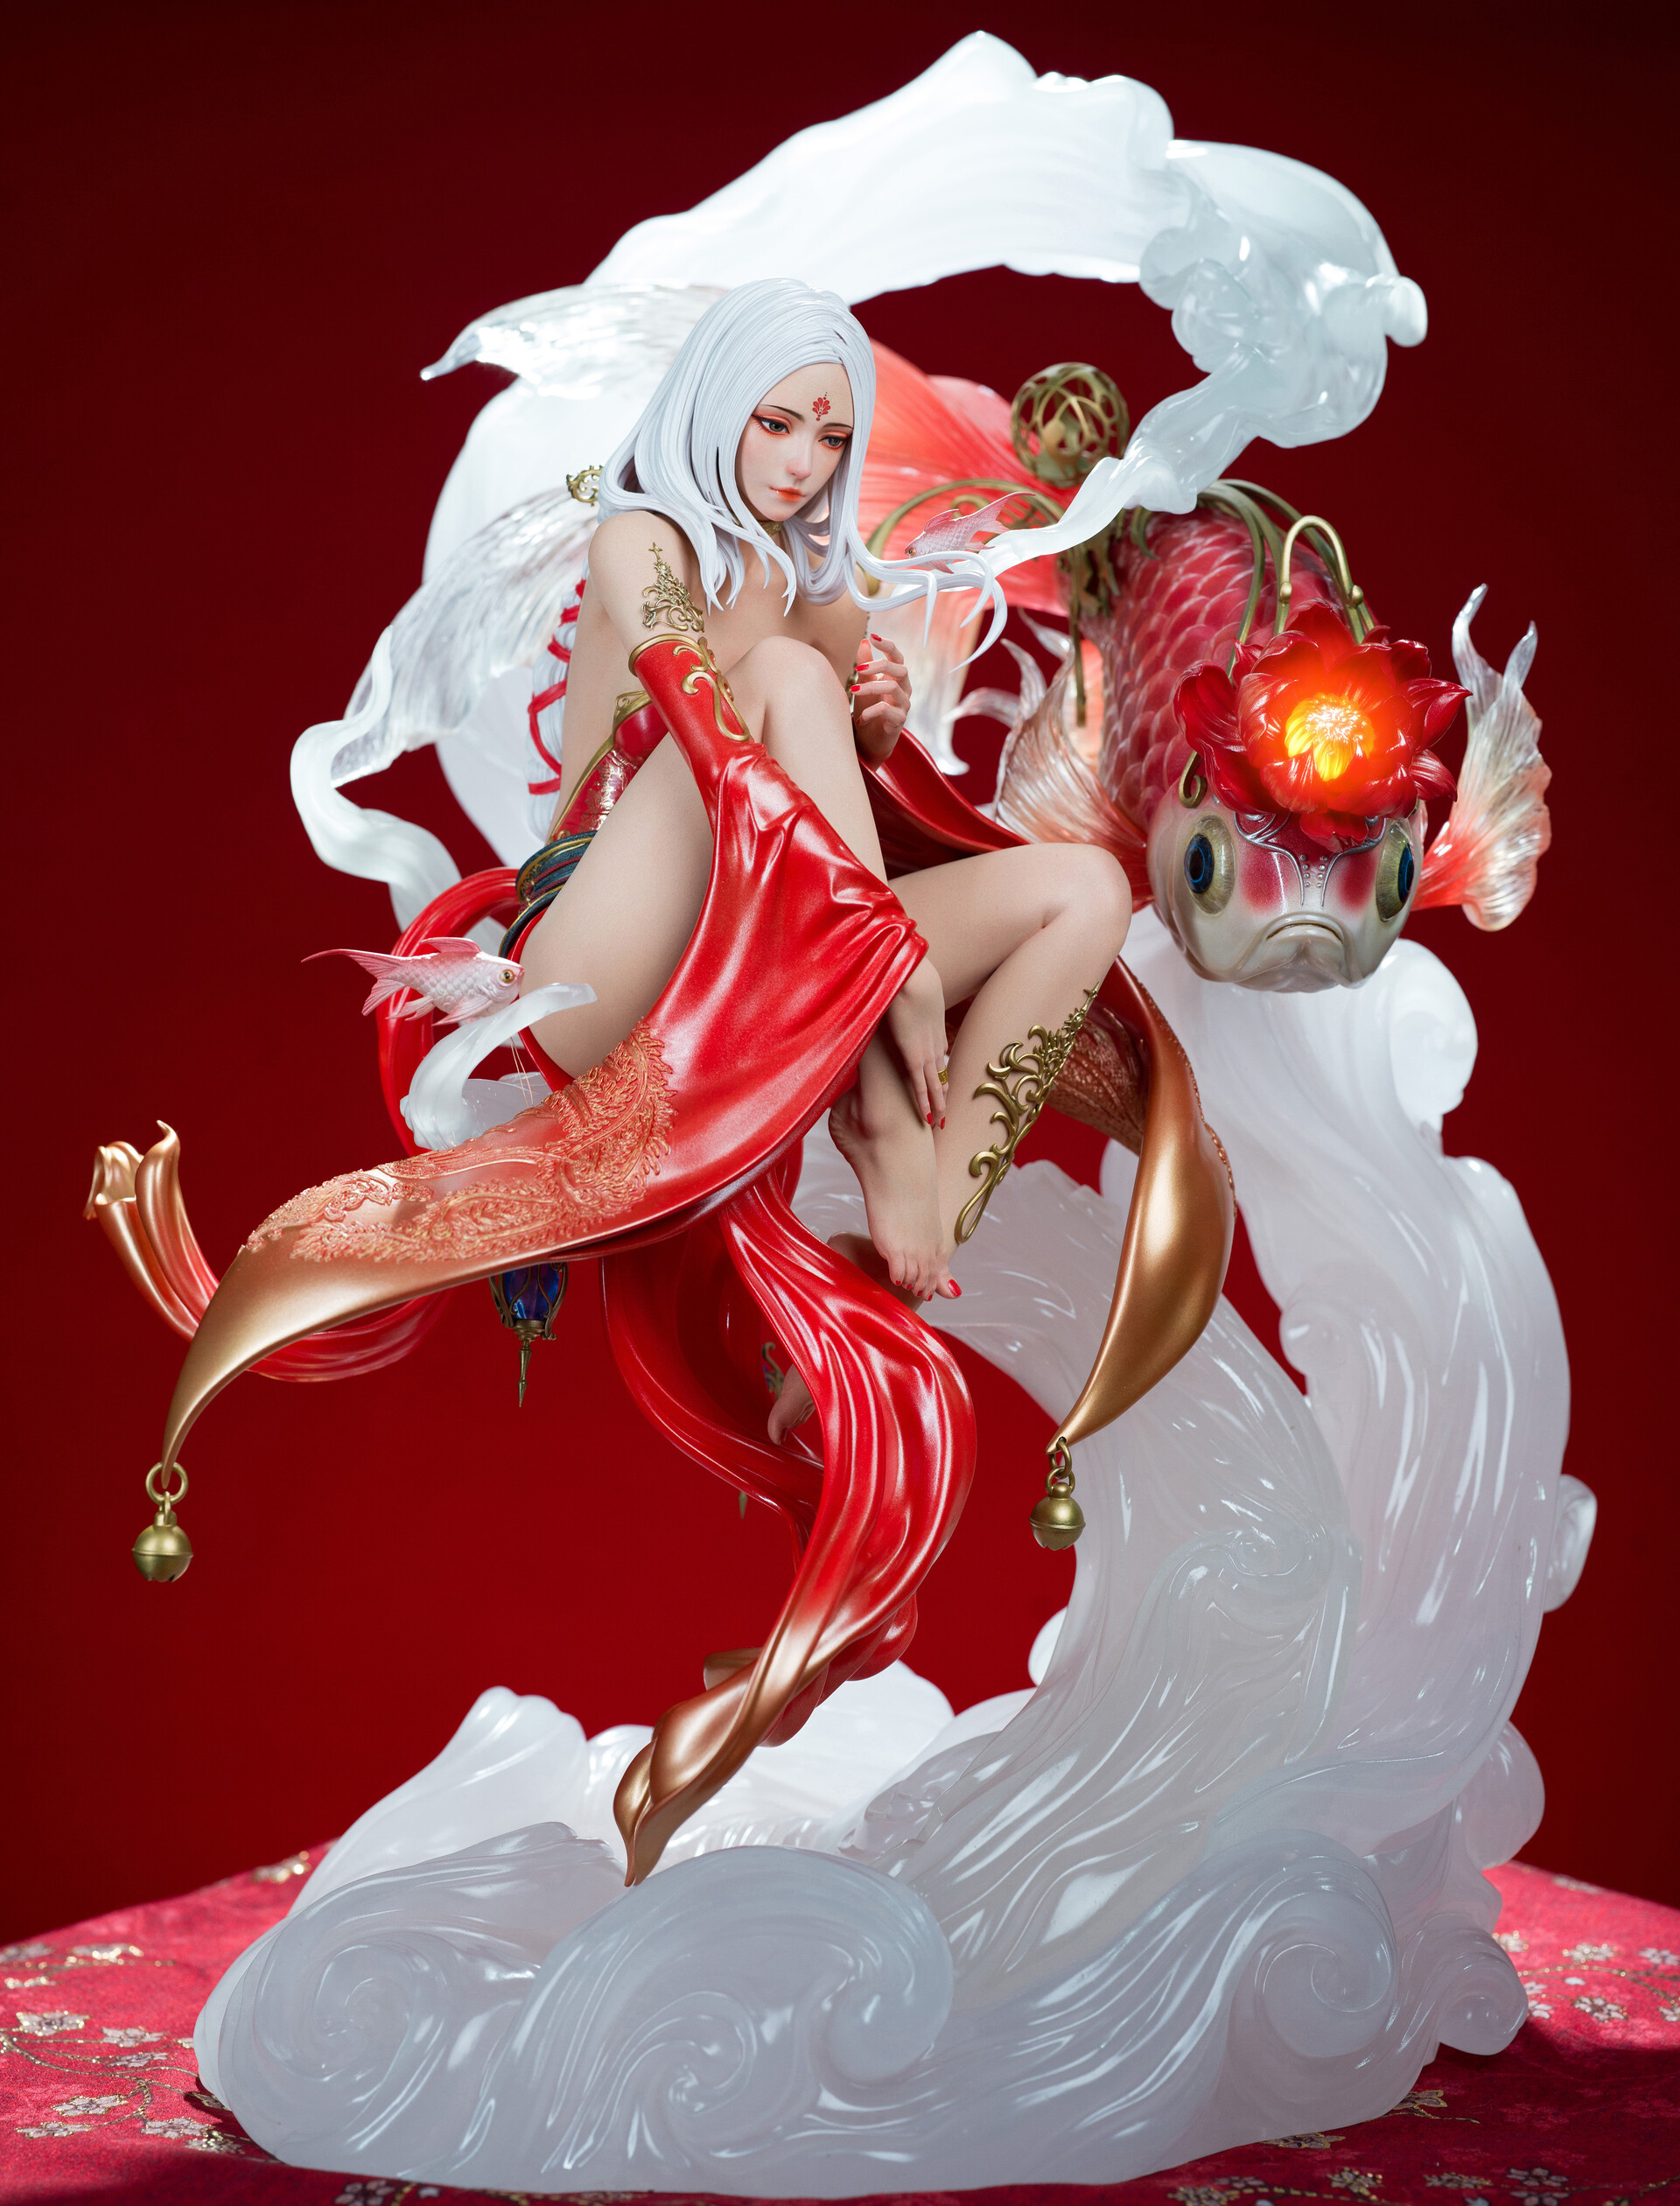 General 1920x2521 Haocen Li women fantasy art fantasy girl red background simple background digital art silver hair red nails painted nails painted toenails figurines